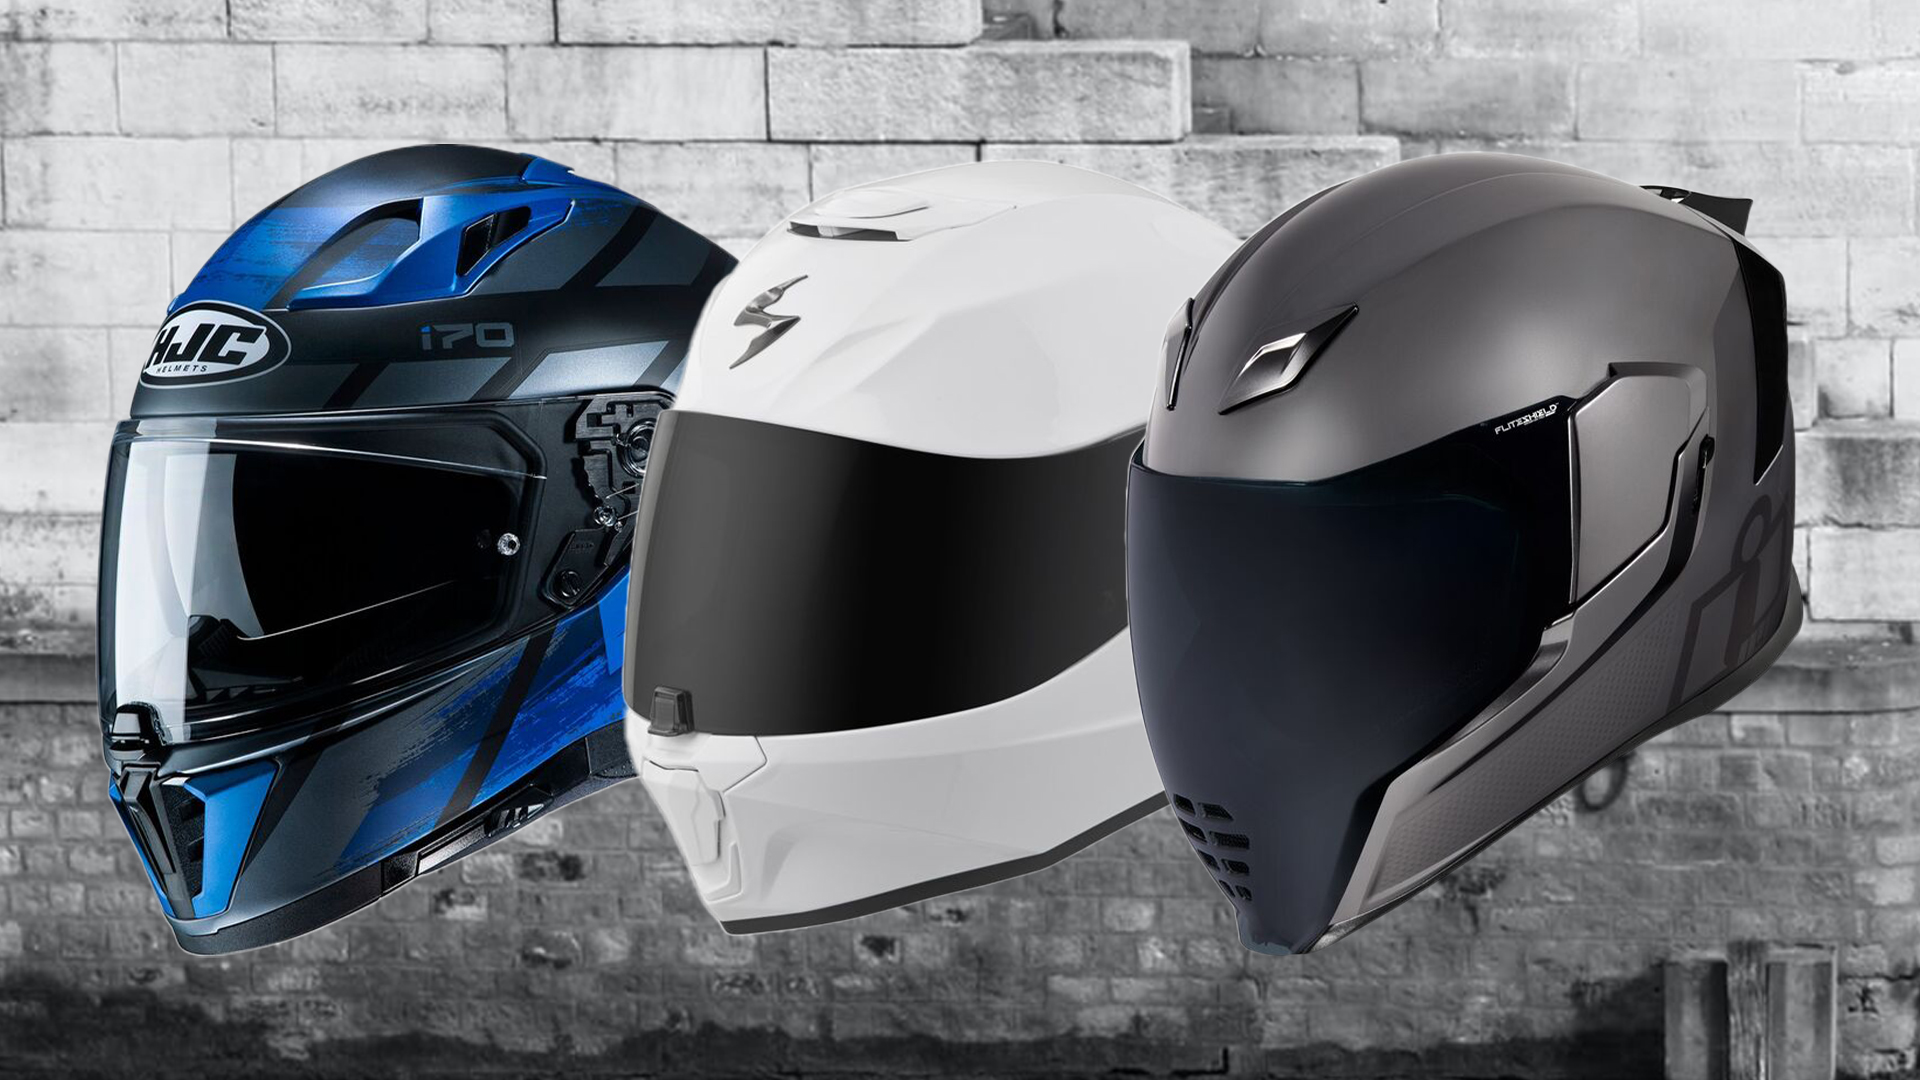 Know more in detail about the Best Budget helmets